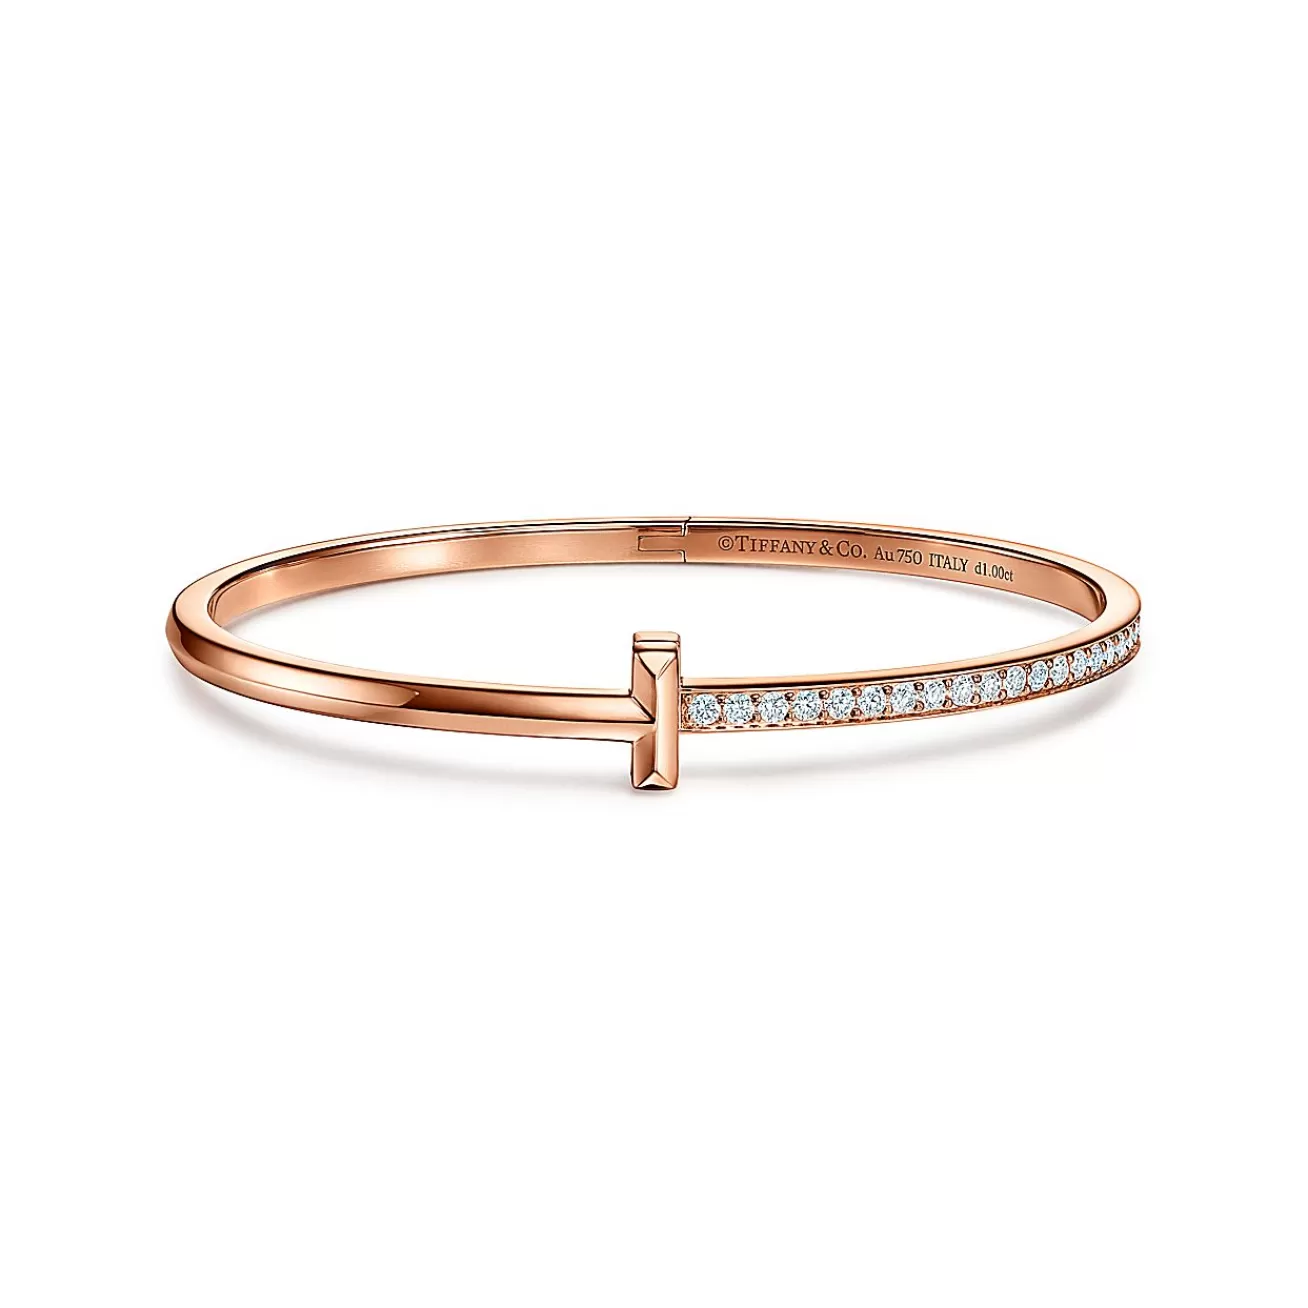 Tiffany & Co. Tiffany T T1 Hinged Bangle in Rose Gold with Diamonds, Narrow | ^ Bracelets | Gifts for Her